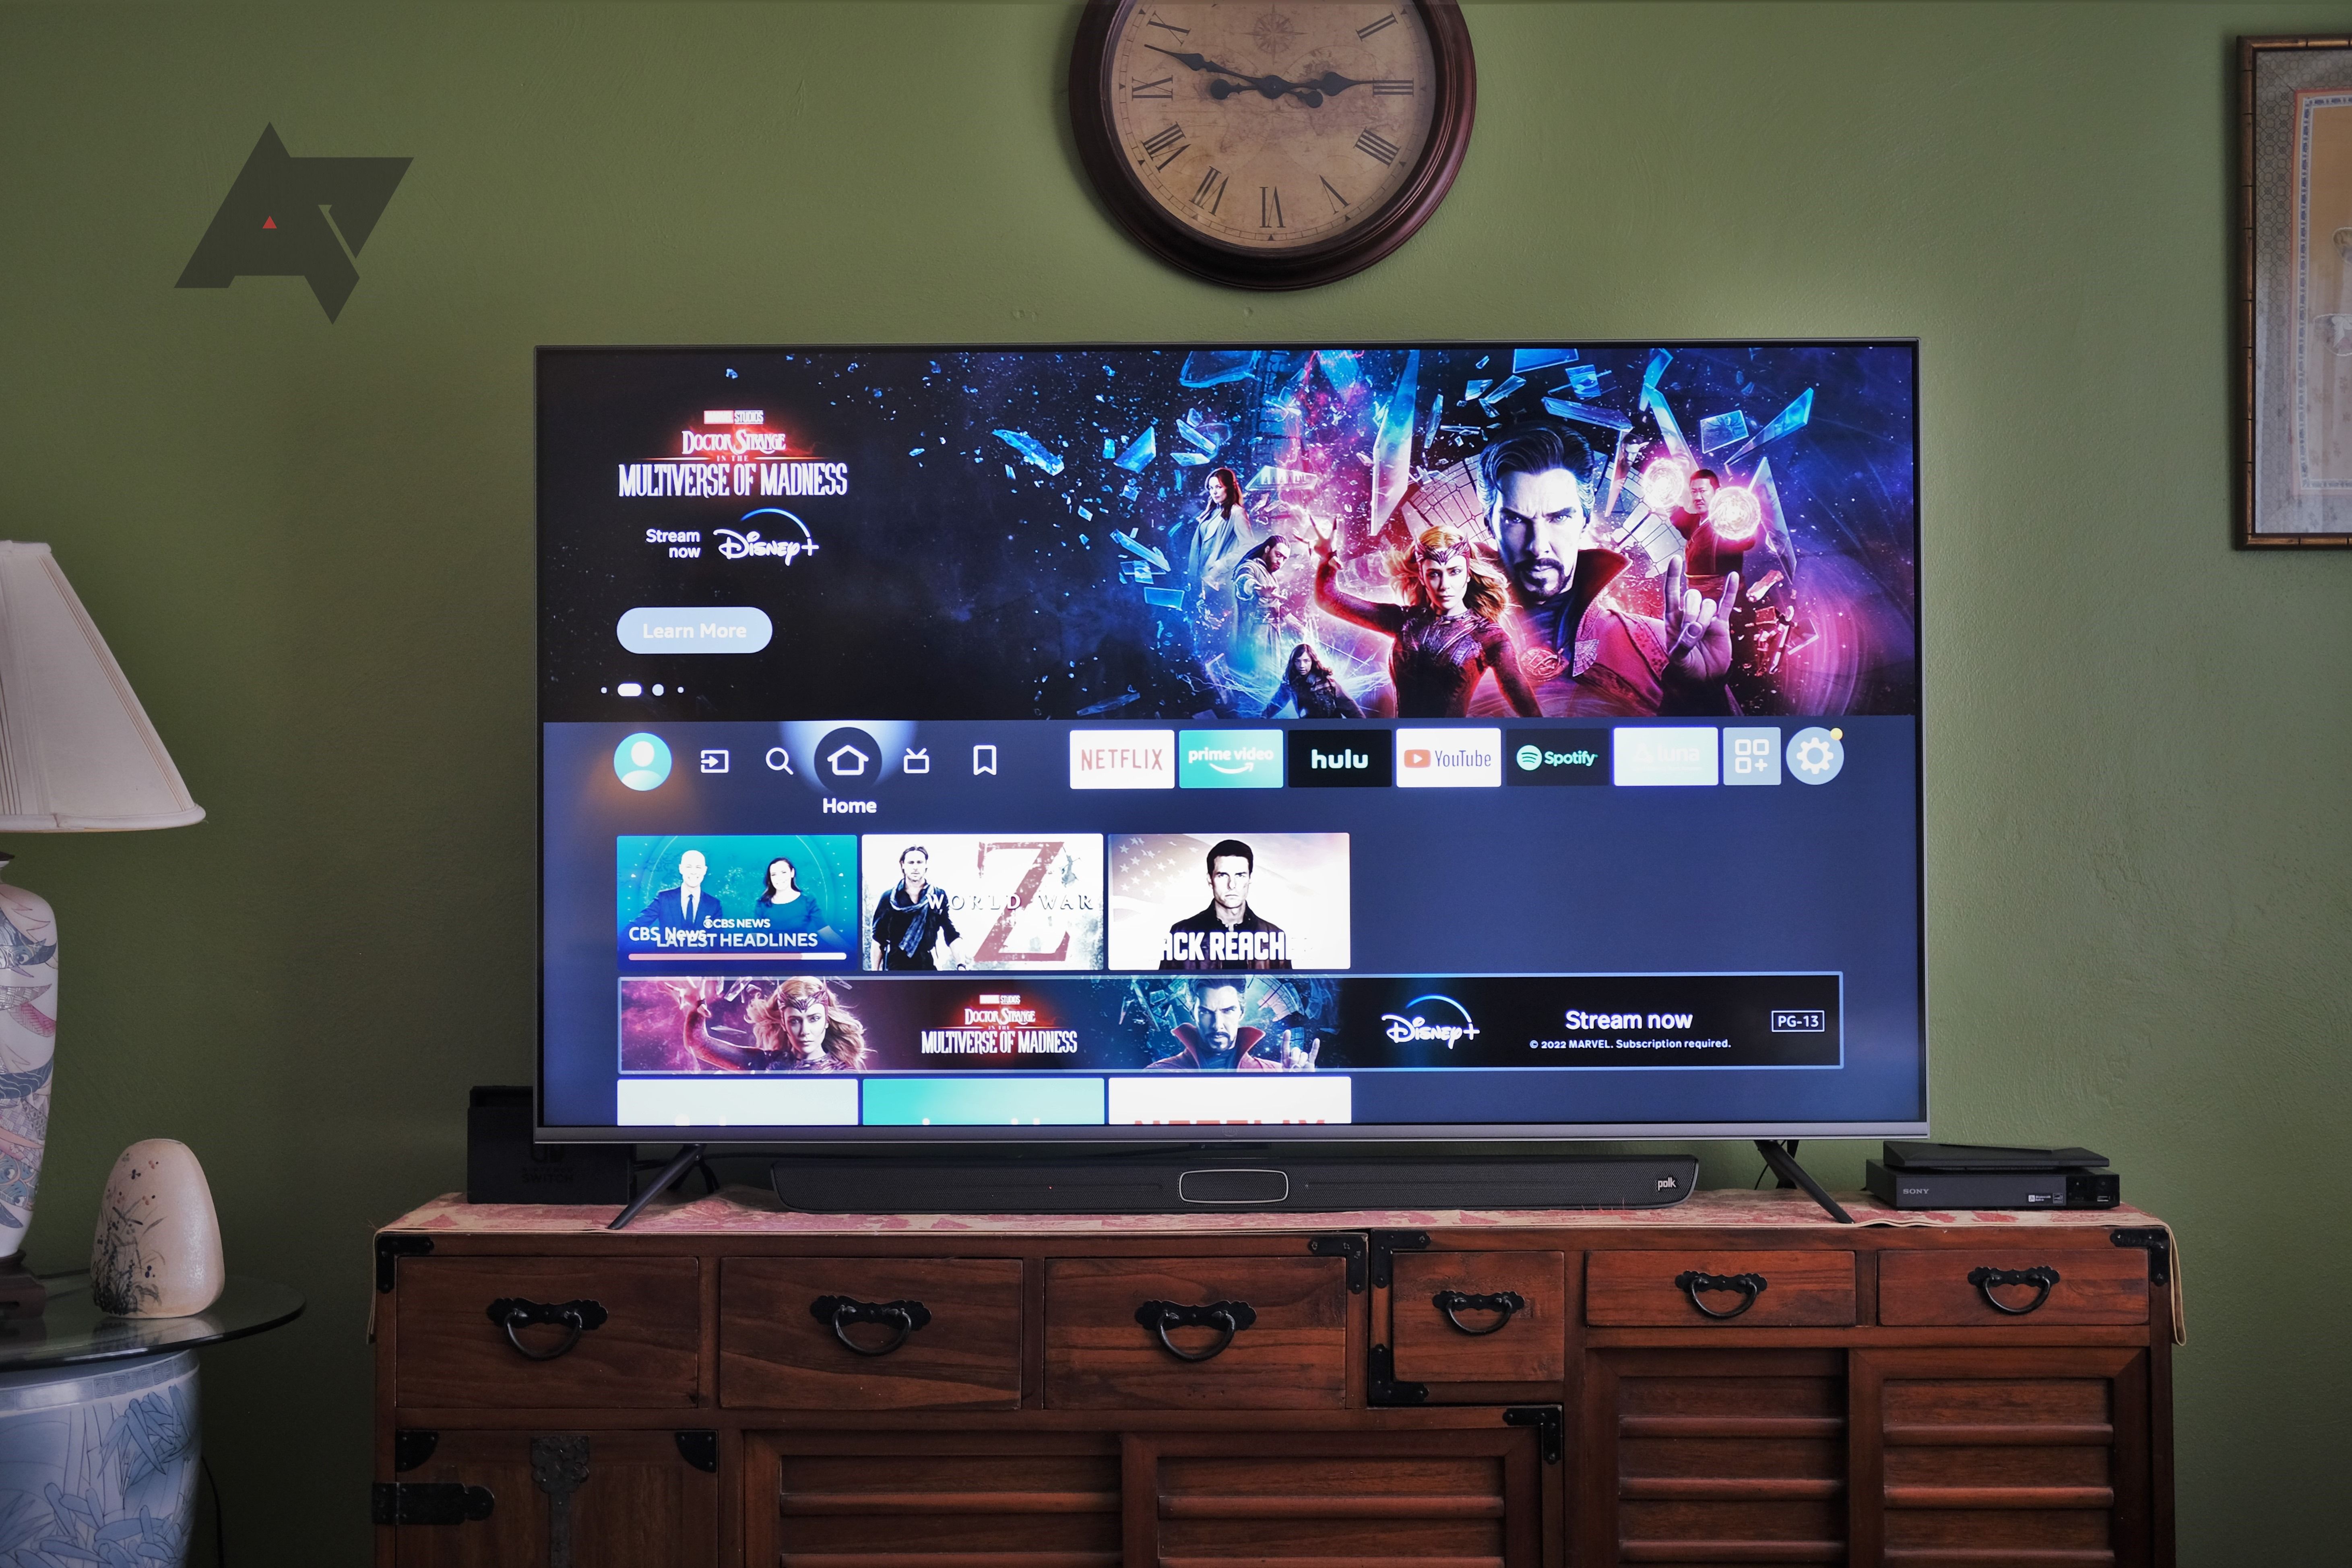 A powered-on smart TV sitting on a wooden entertainment center in front of a green wall.